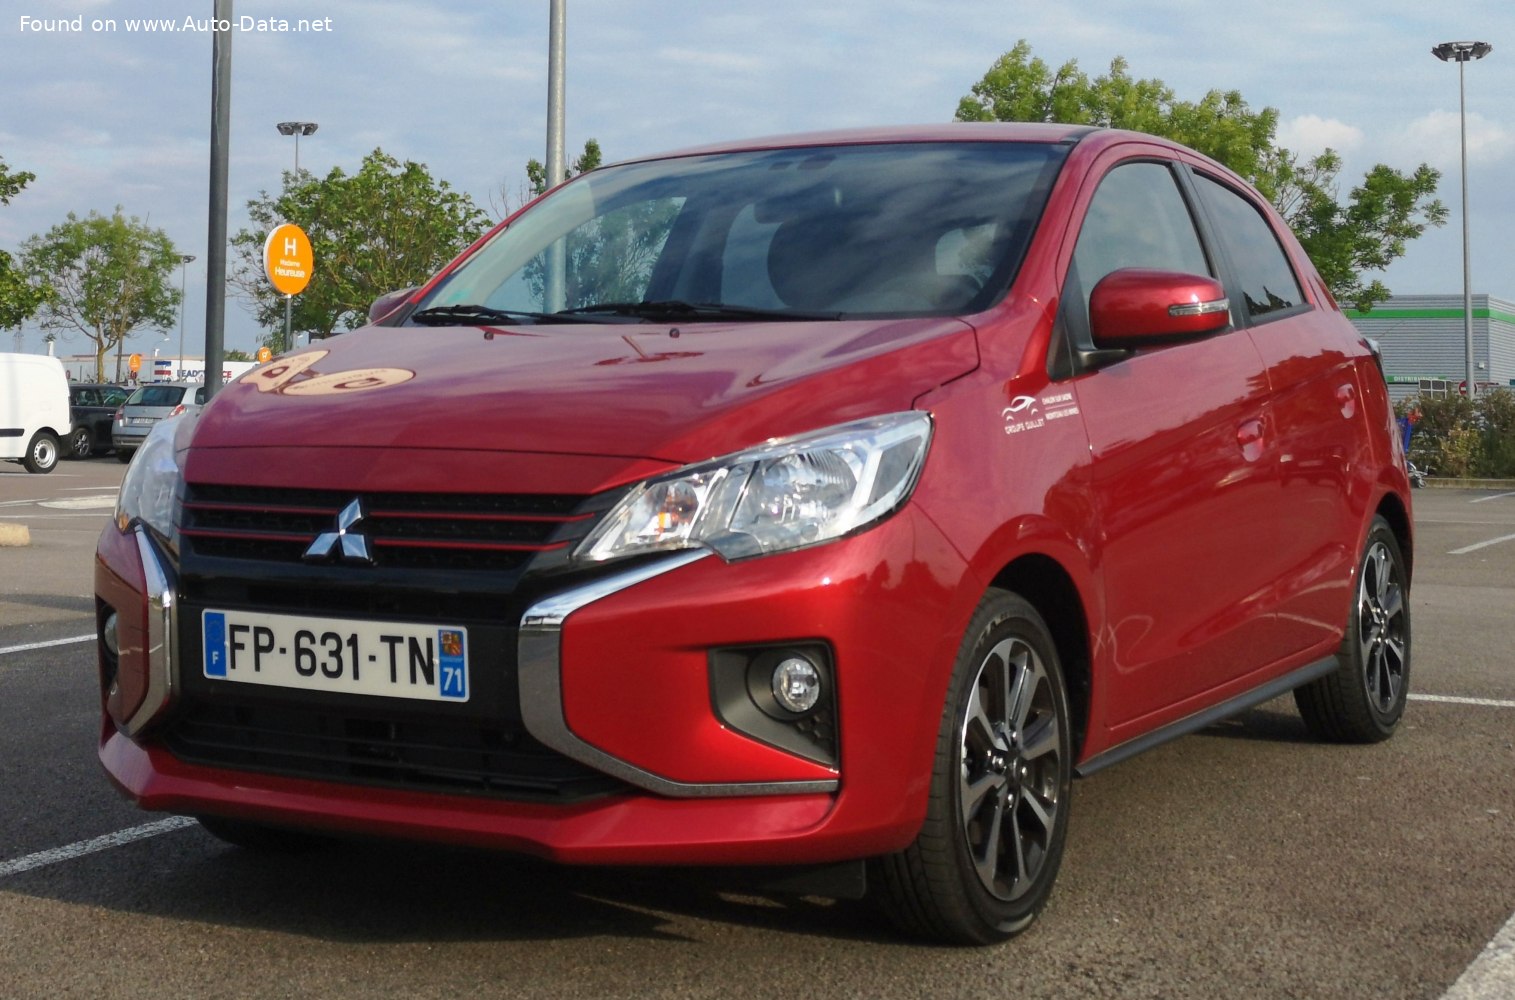 https://www.auto-data.net/images/f31/Mitsubishi-Space-Star-facelift-2019.jpg